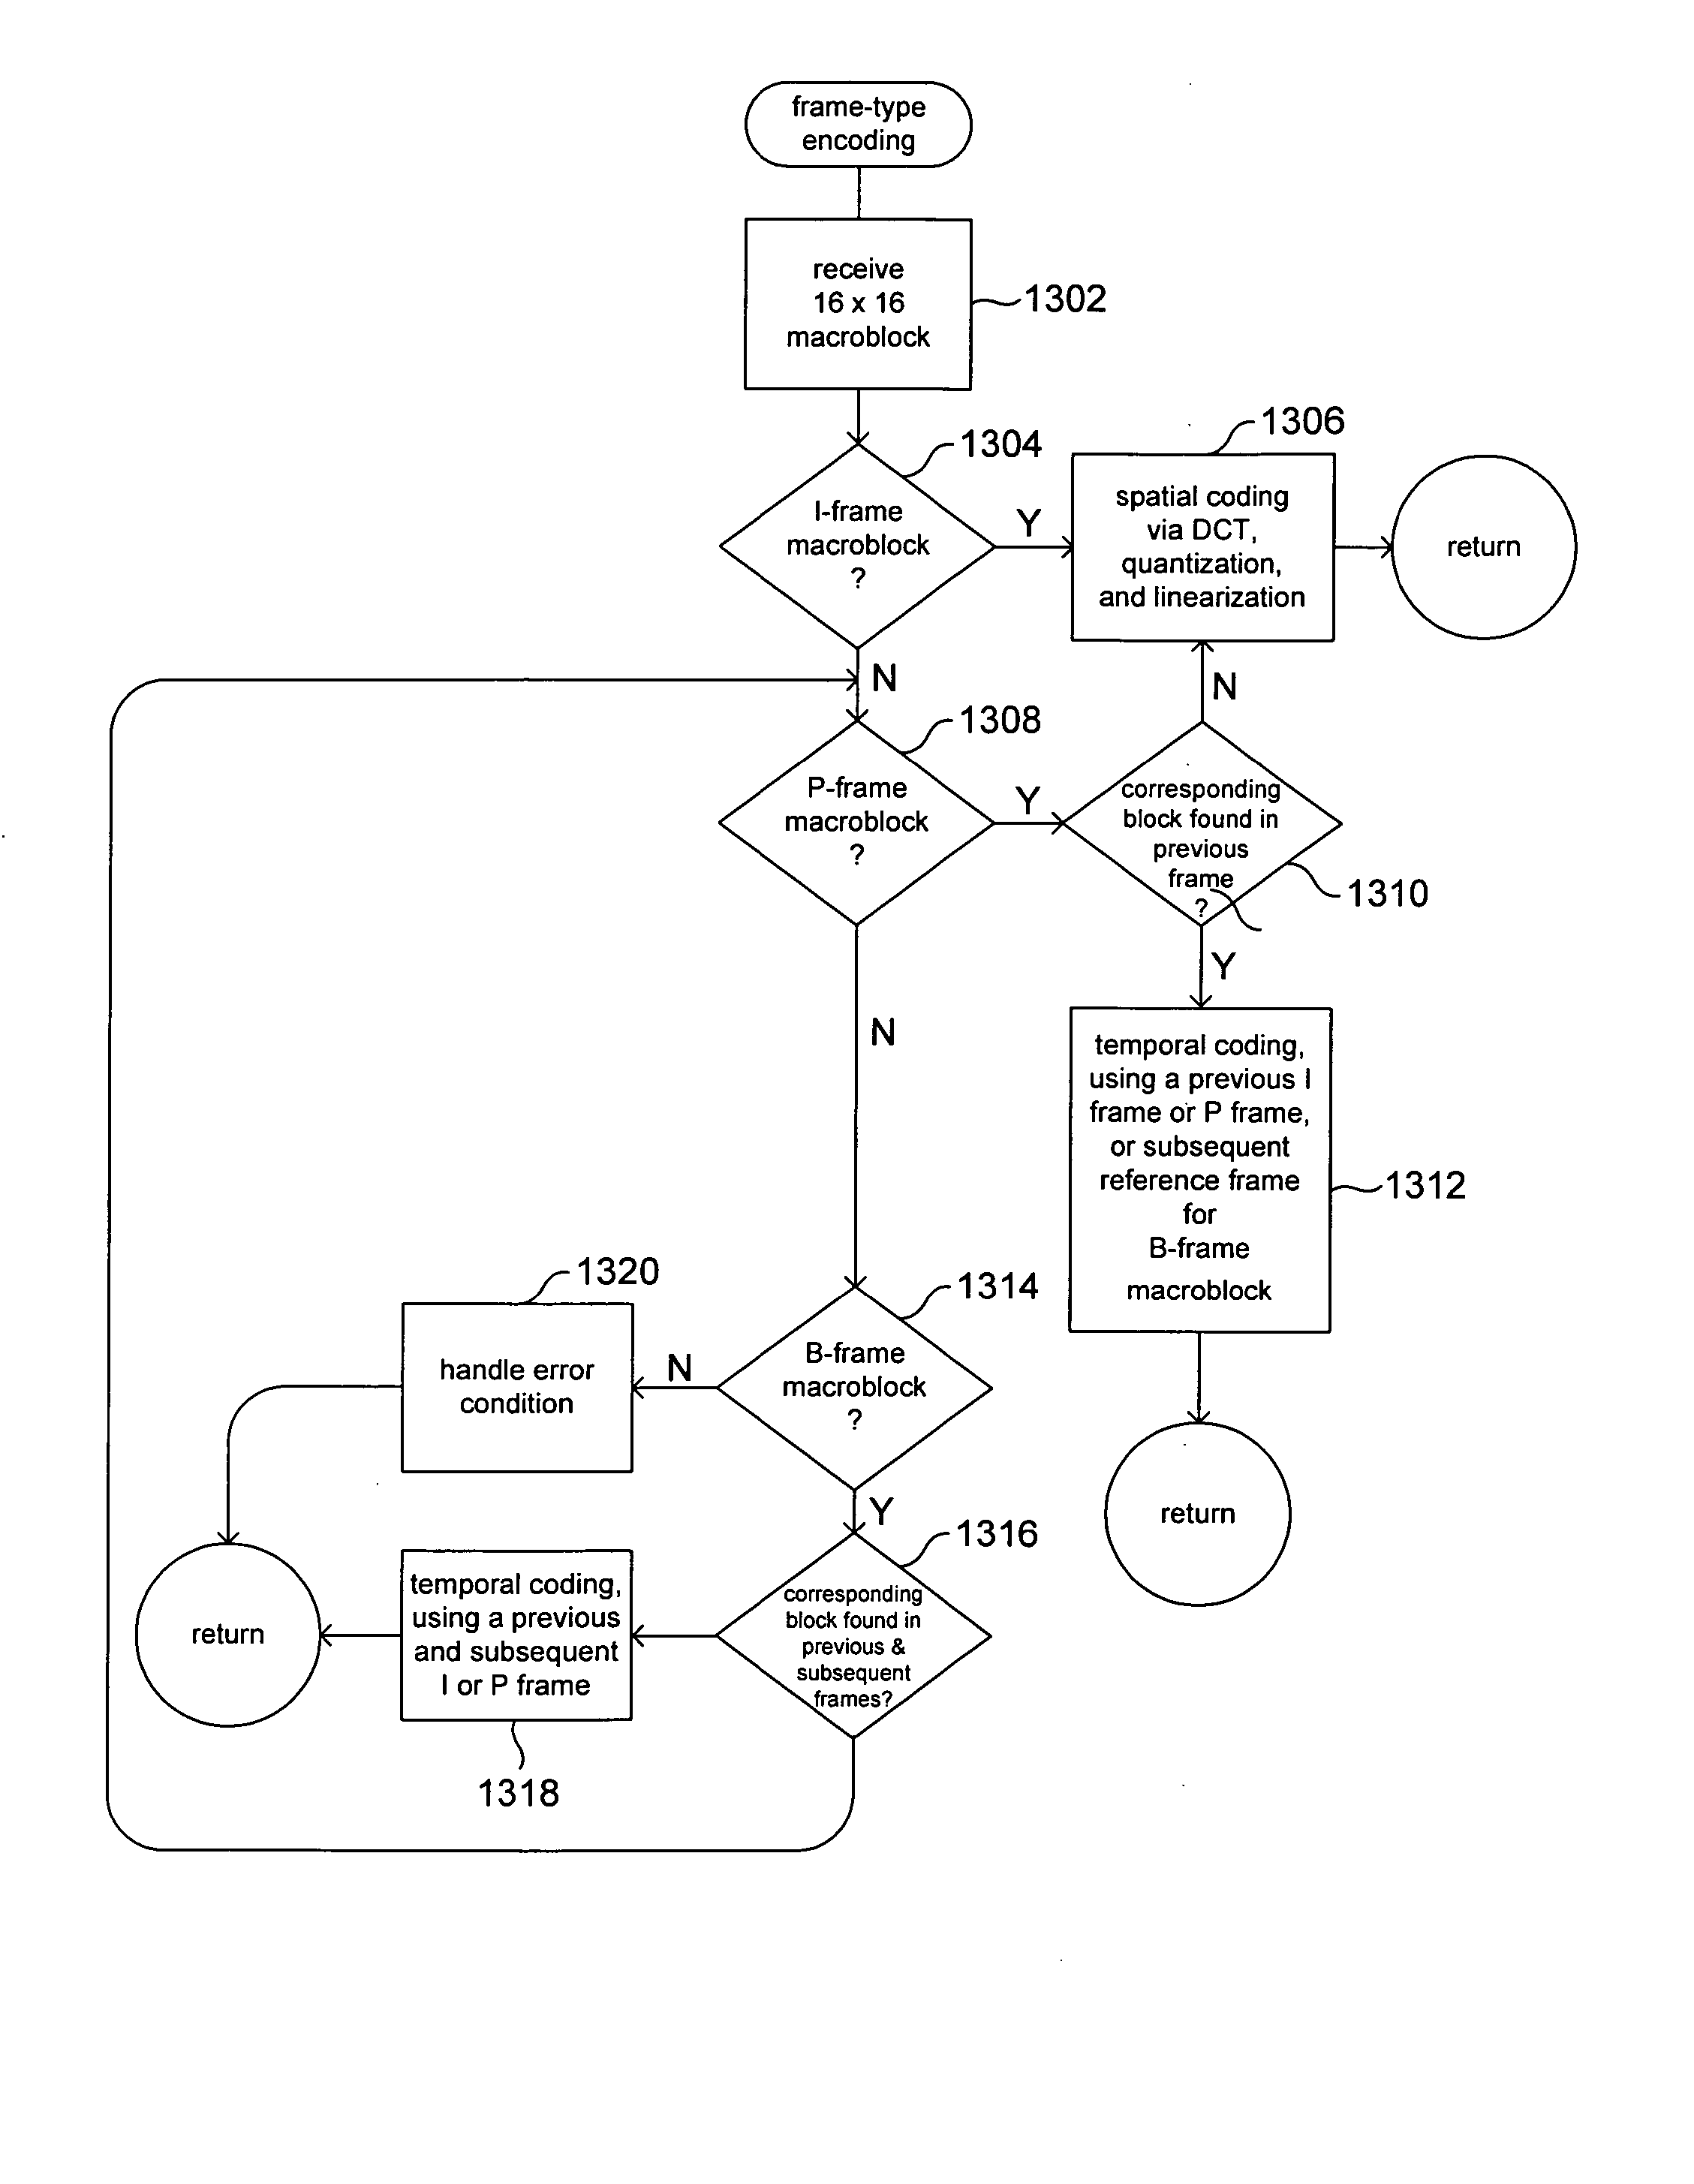 Robust and efficient compression/decompression providing for adjustable division of computational complexity between encoding/compression and decoding/decompression